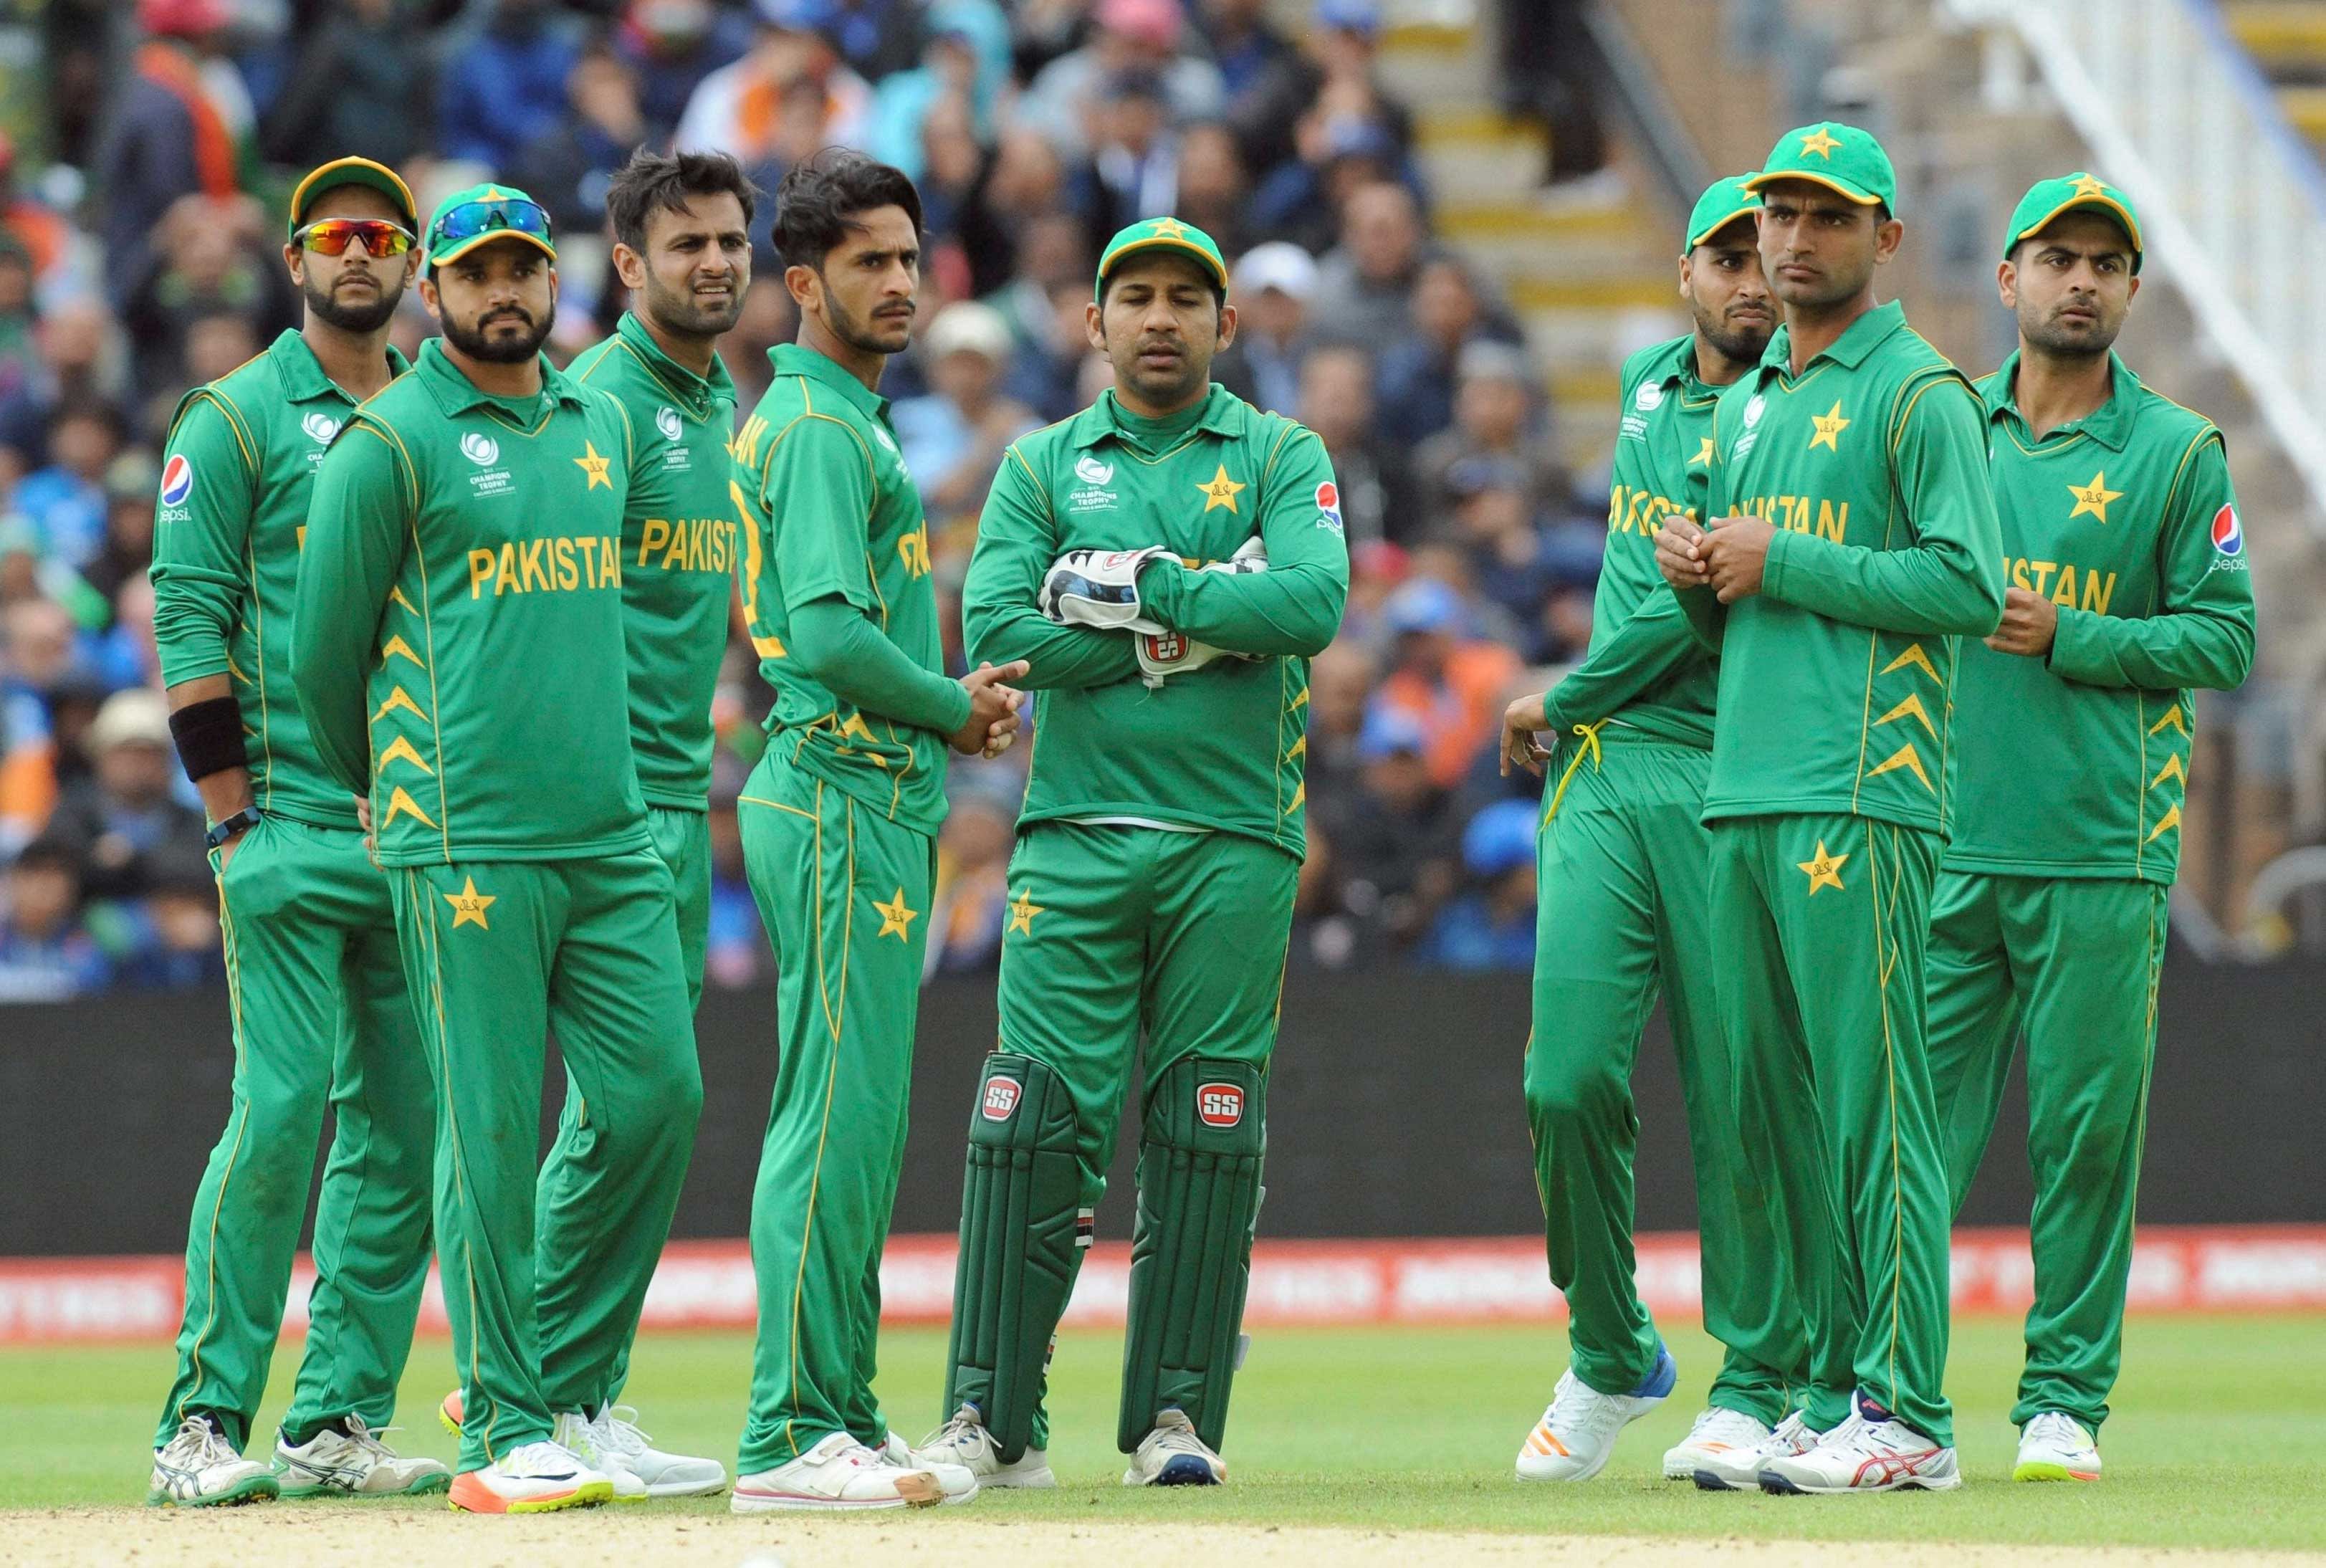 Pakistan captain Sarfraz Ahmed won the toss and elected to bowl first against Sri Lanka. AP,PTI Photo